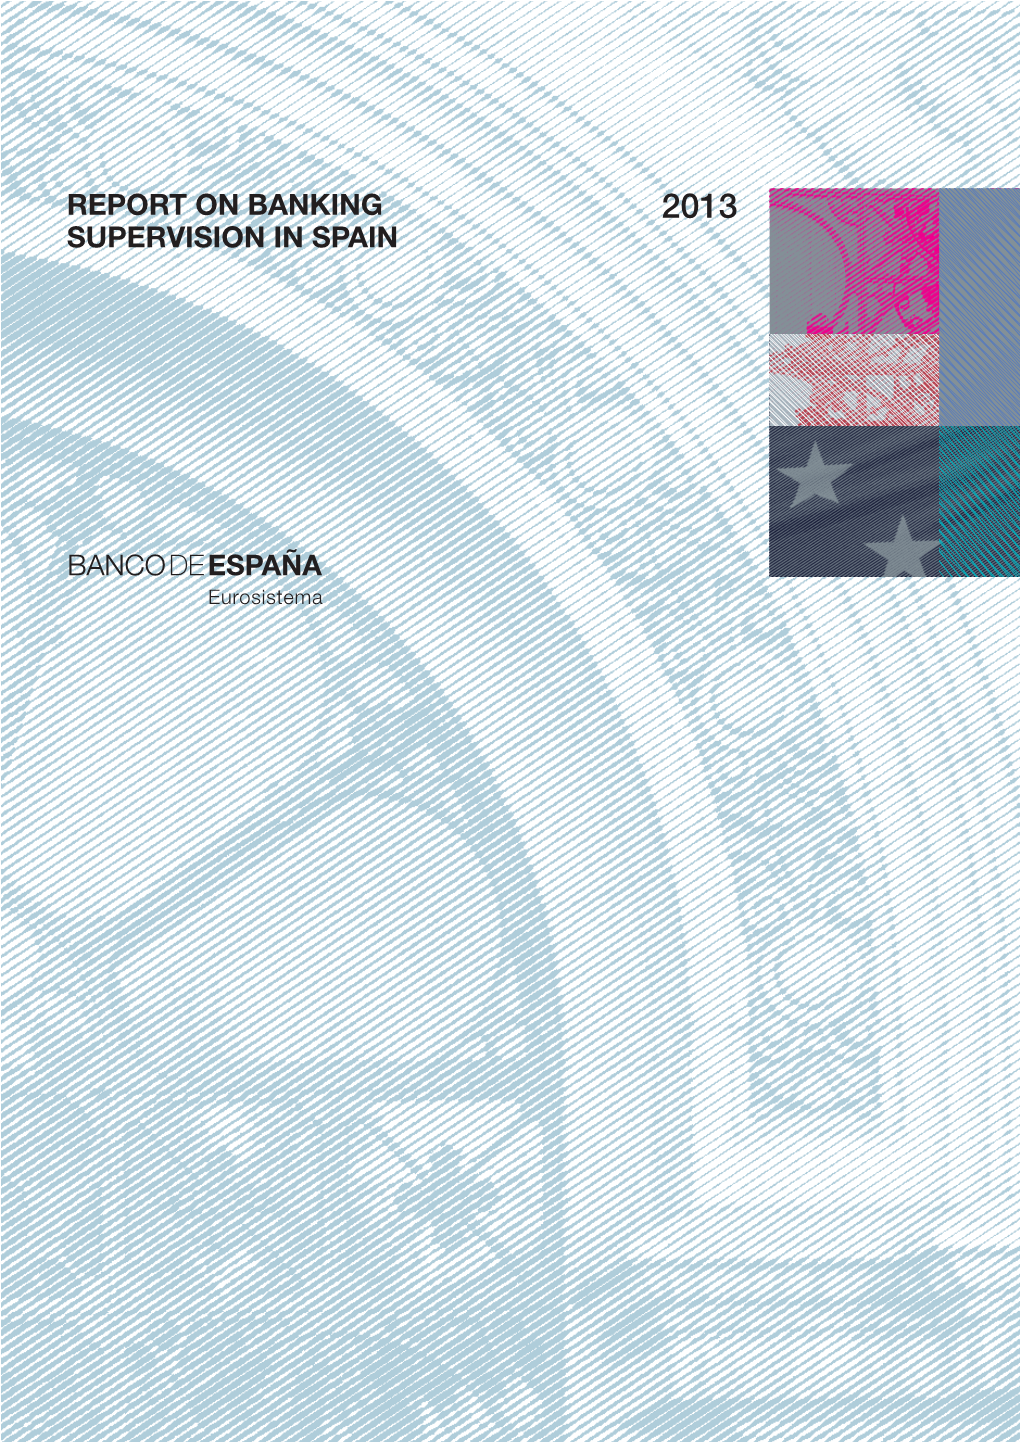 Report on Banking Supervision in Spain 2013